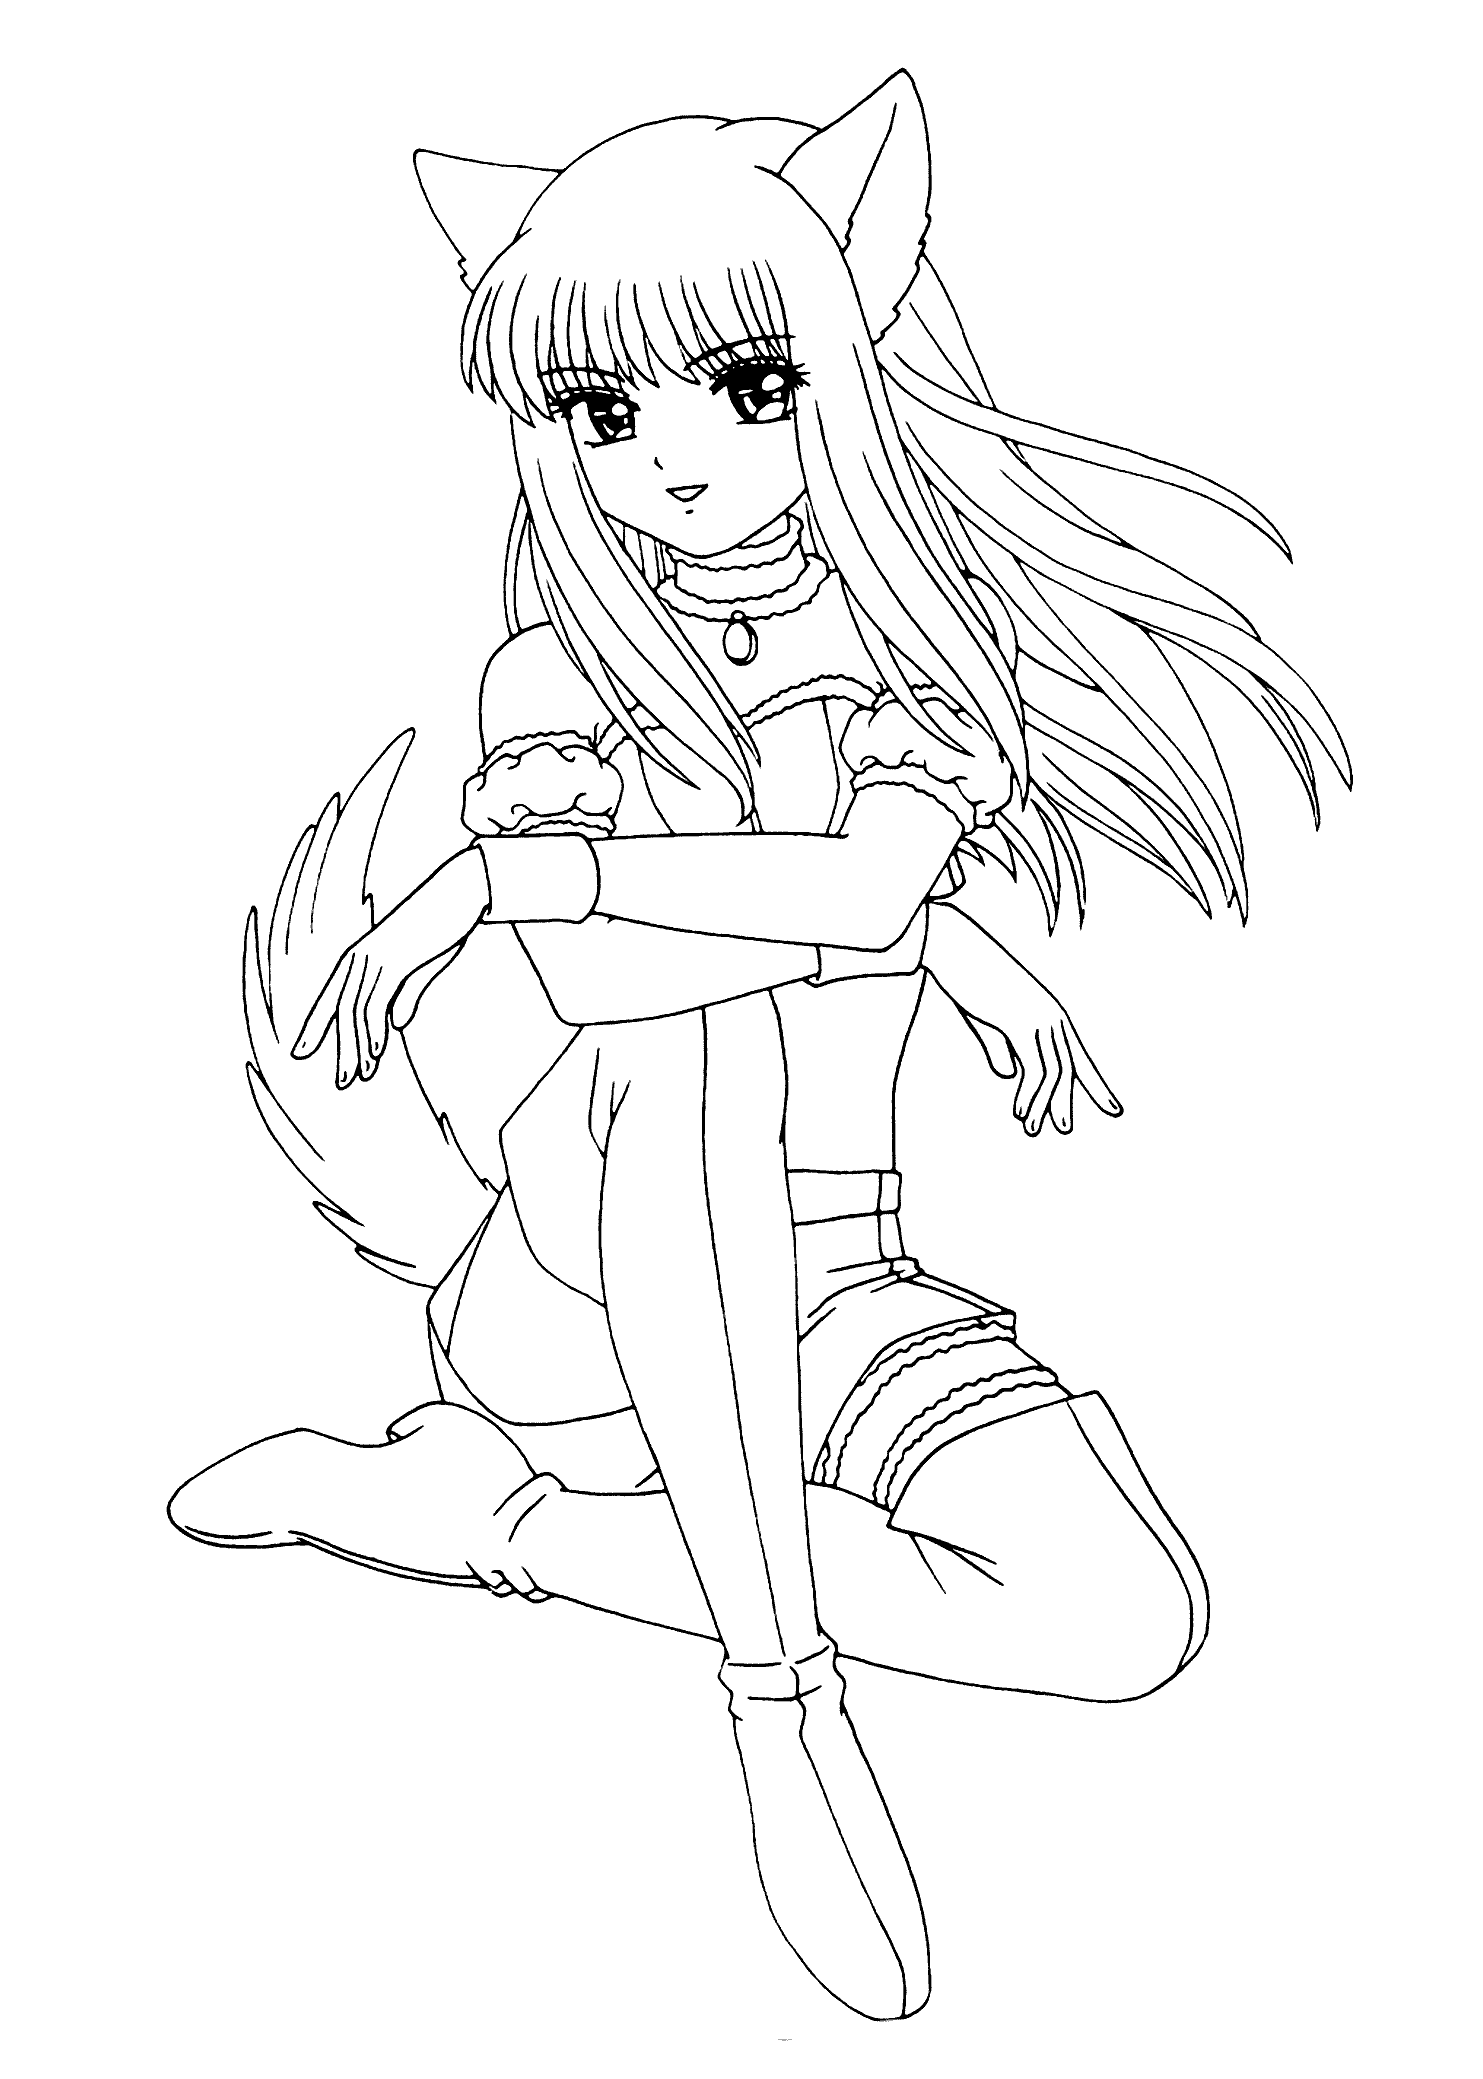 Anime Cat Girl Coloring Pages To Print Coloring Pages